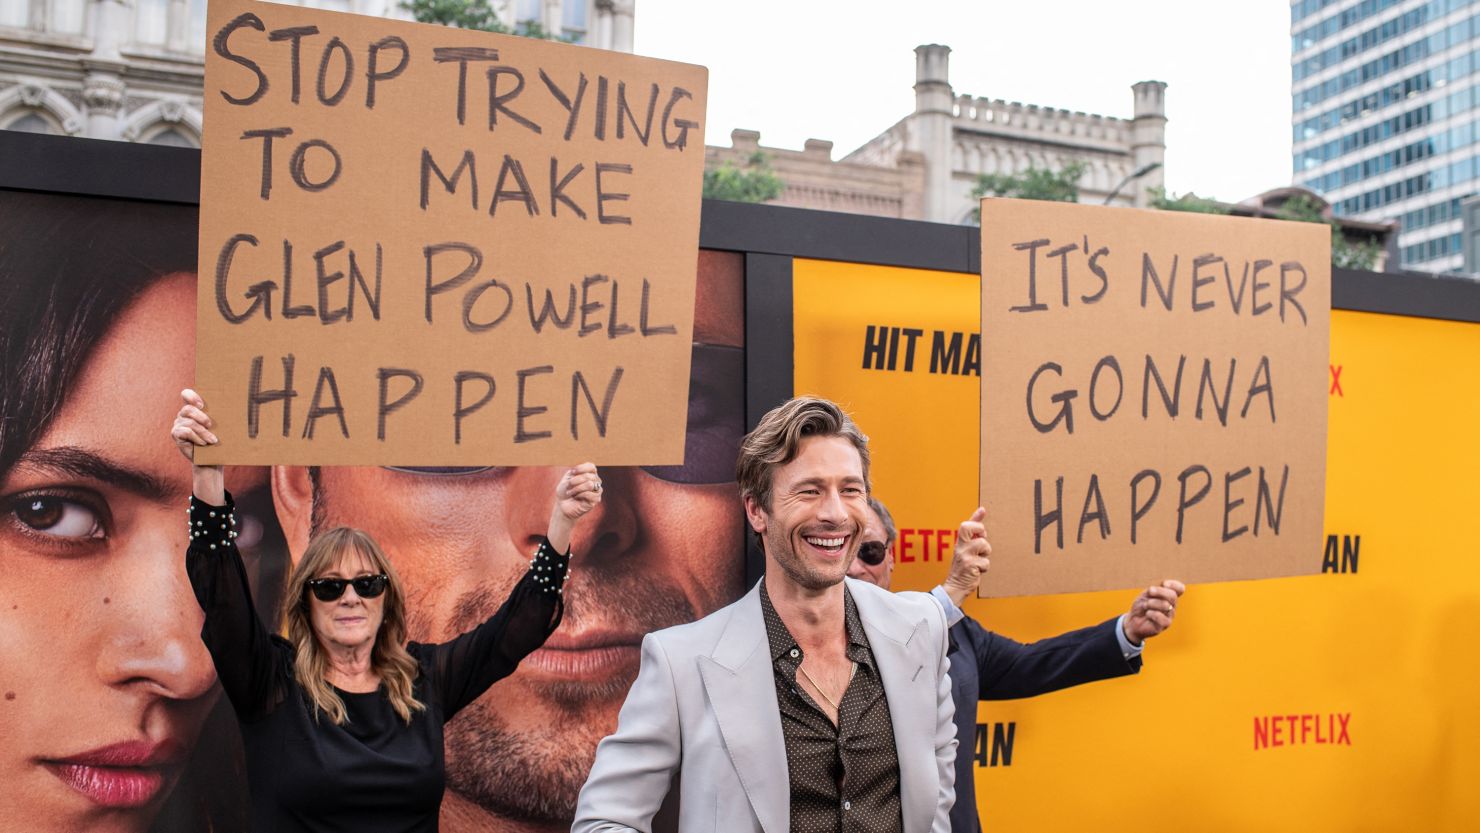 Glen Powell's parents hold up signs behind him as they attend the special screening of "Hitman" in Austin, Texas on Wednesday.